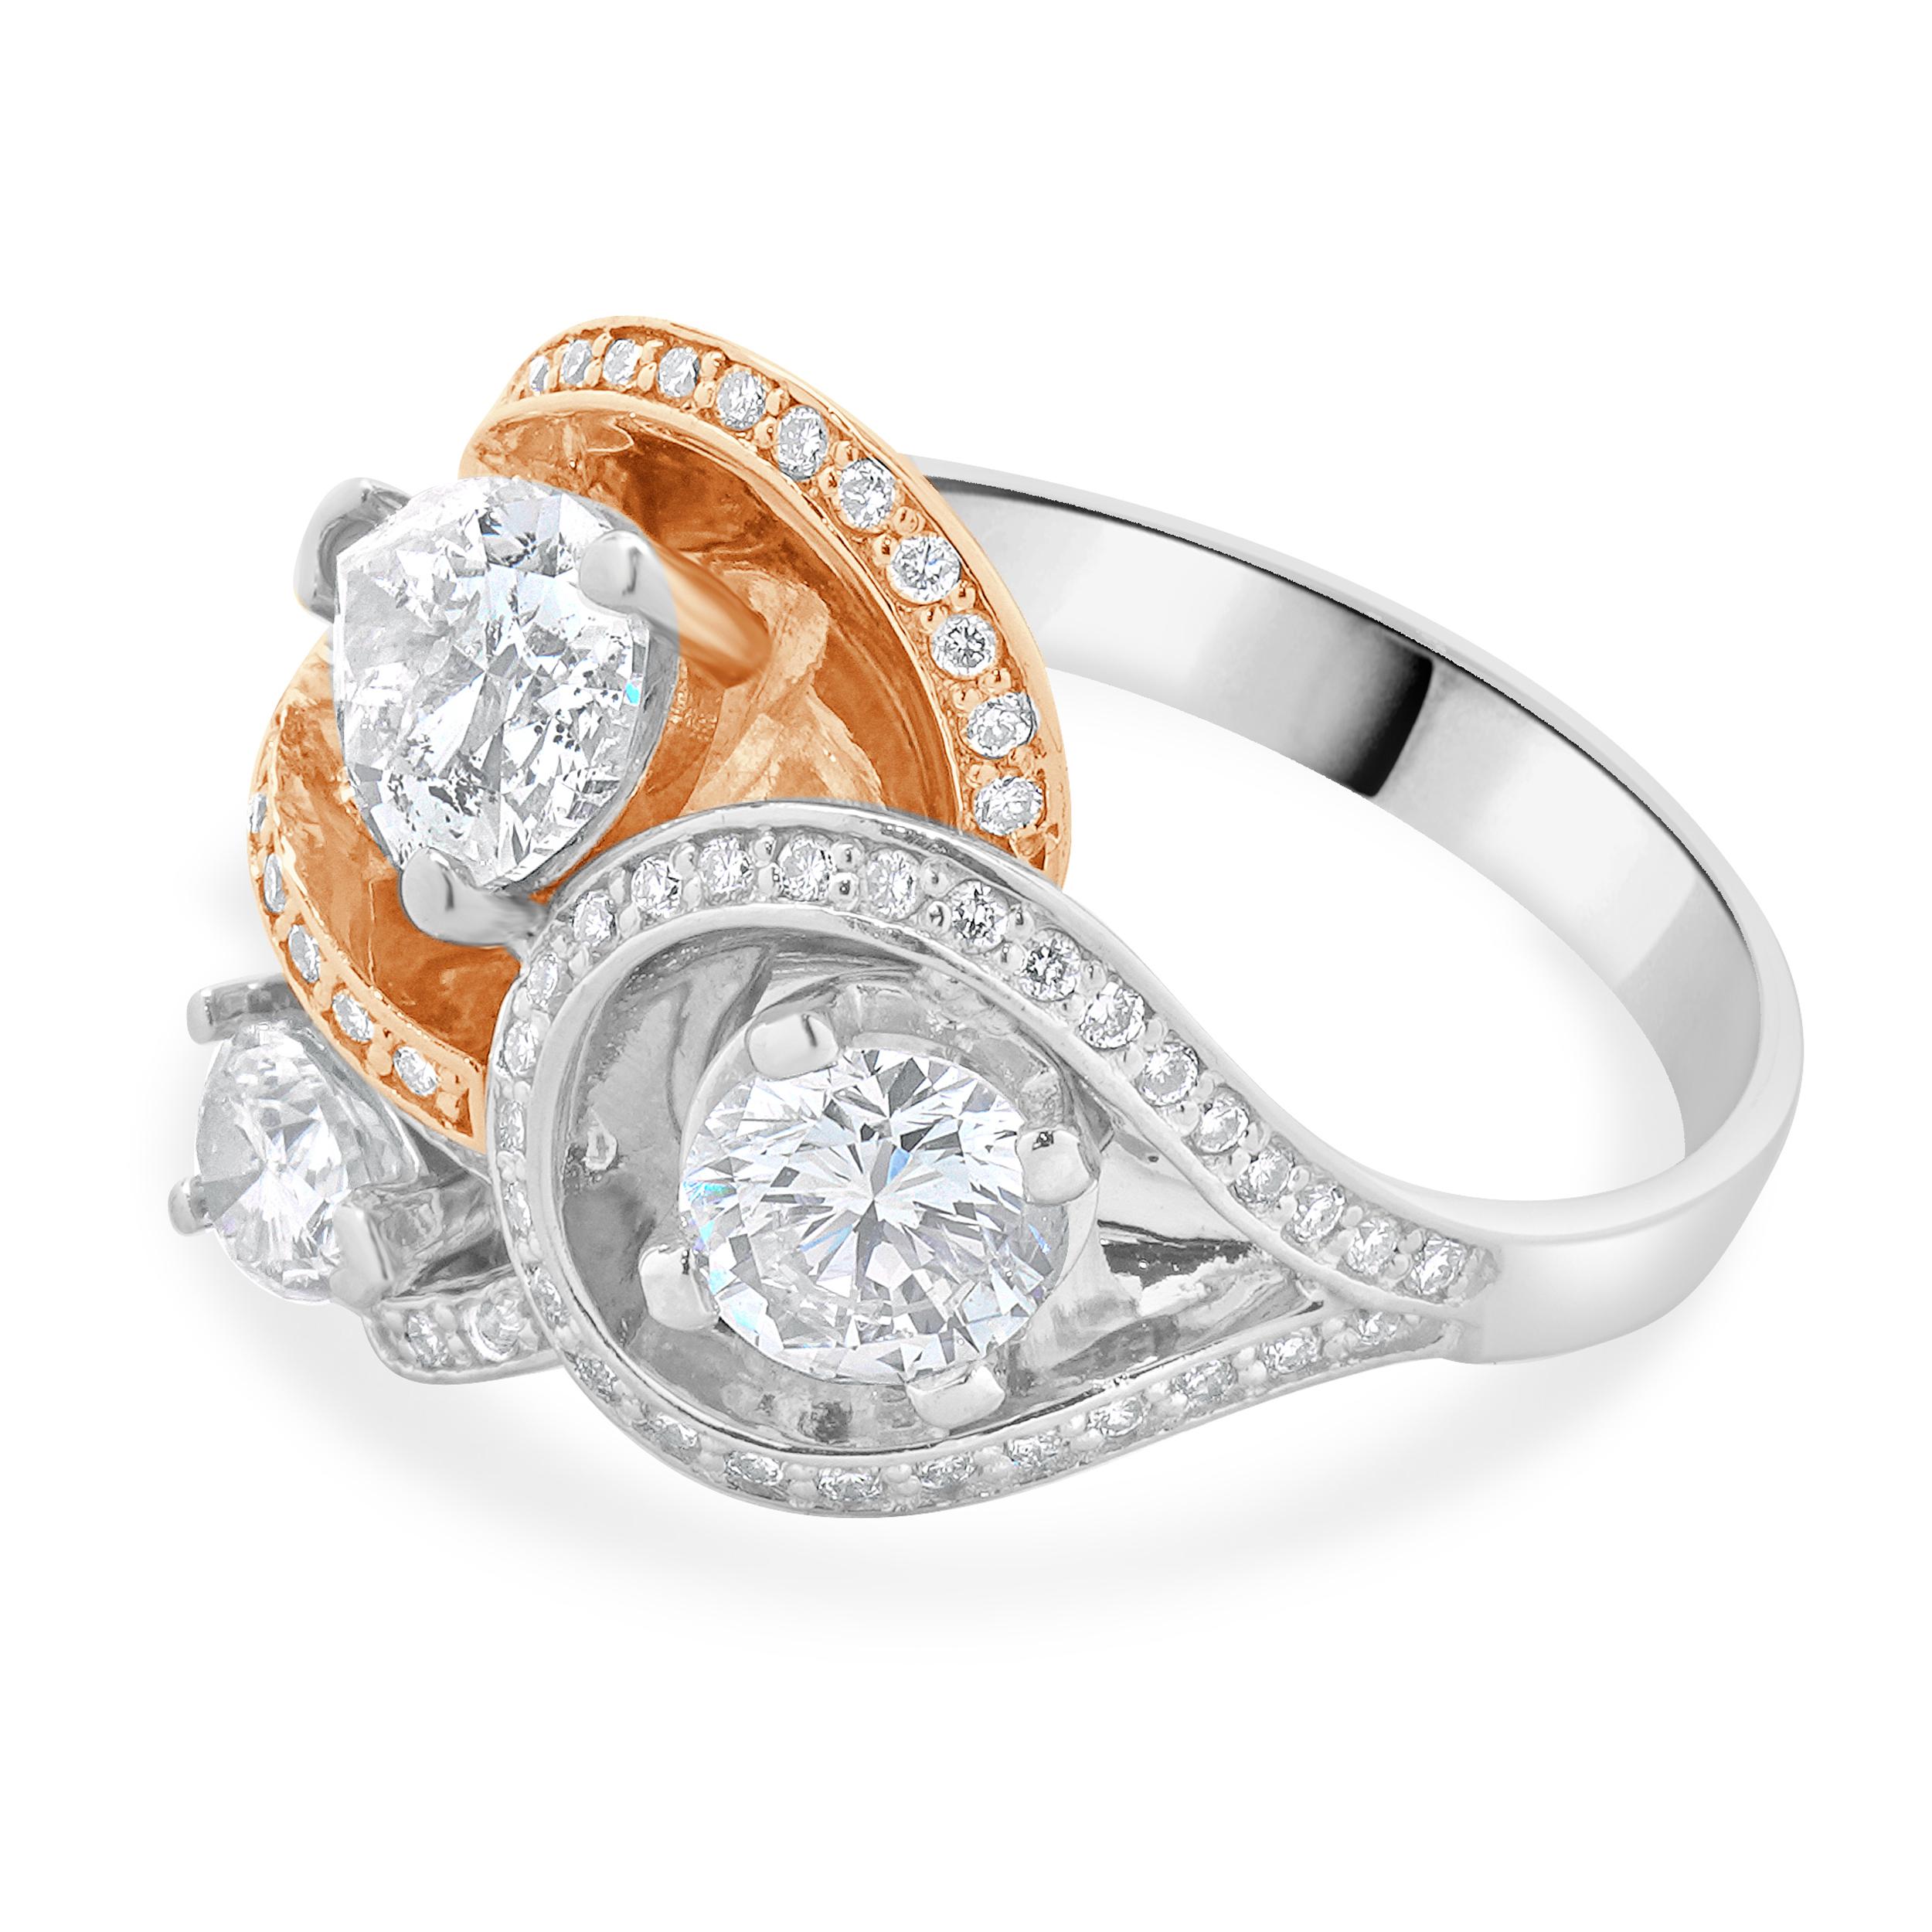 Designer: custom
Material: 14K rose & white gold  
Diamond:  2 pear cut = 1.30cttw 
Color: G / H
Clarity: SI2-I1
Diamond:  84 round brilliant cut = 0.90cttw
Color: H 
Clarity: SI2-I1
Size: 7.5 sizing available 
Weight: 8.33 grams
